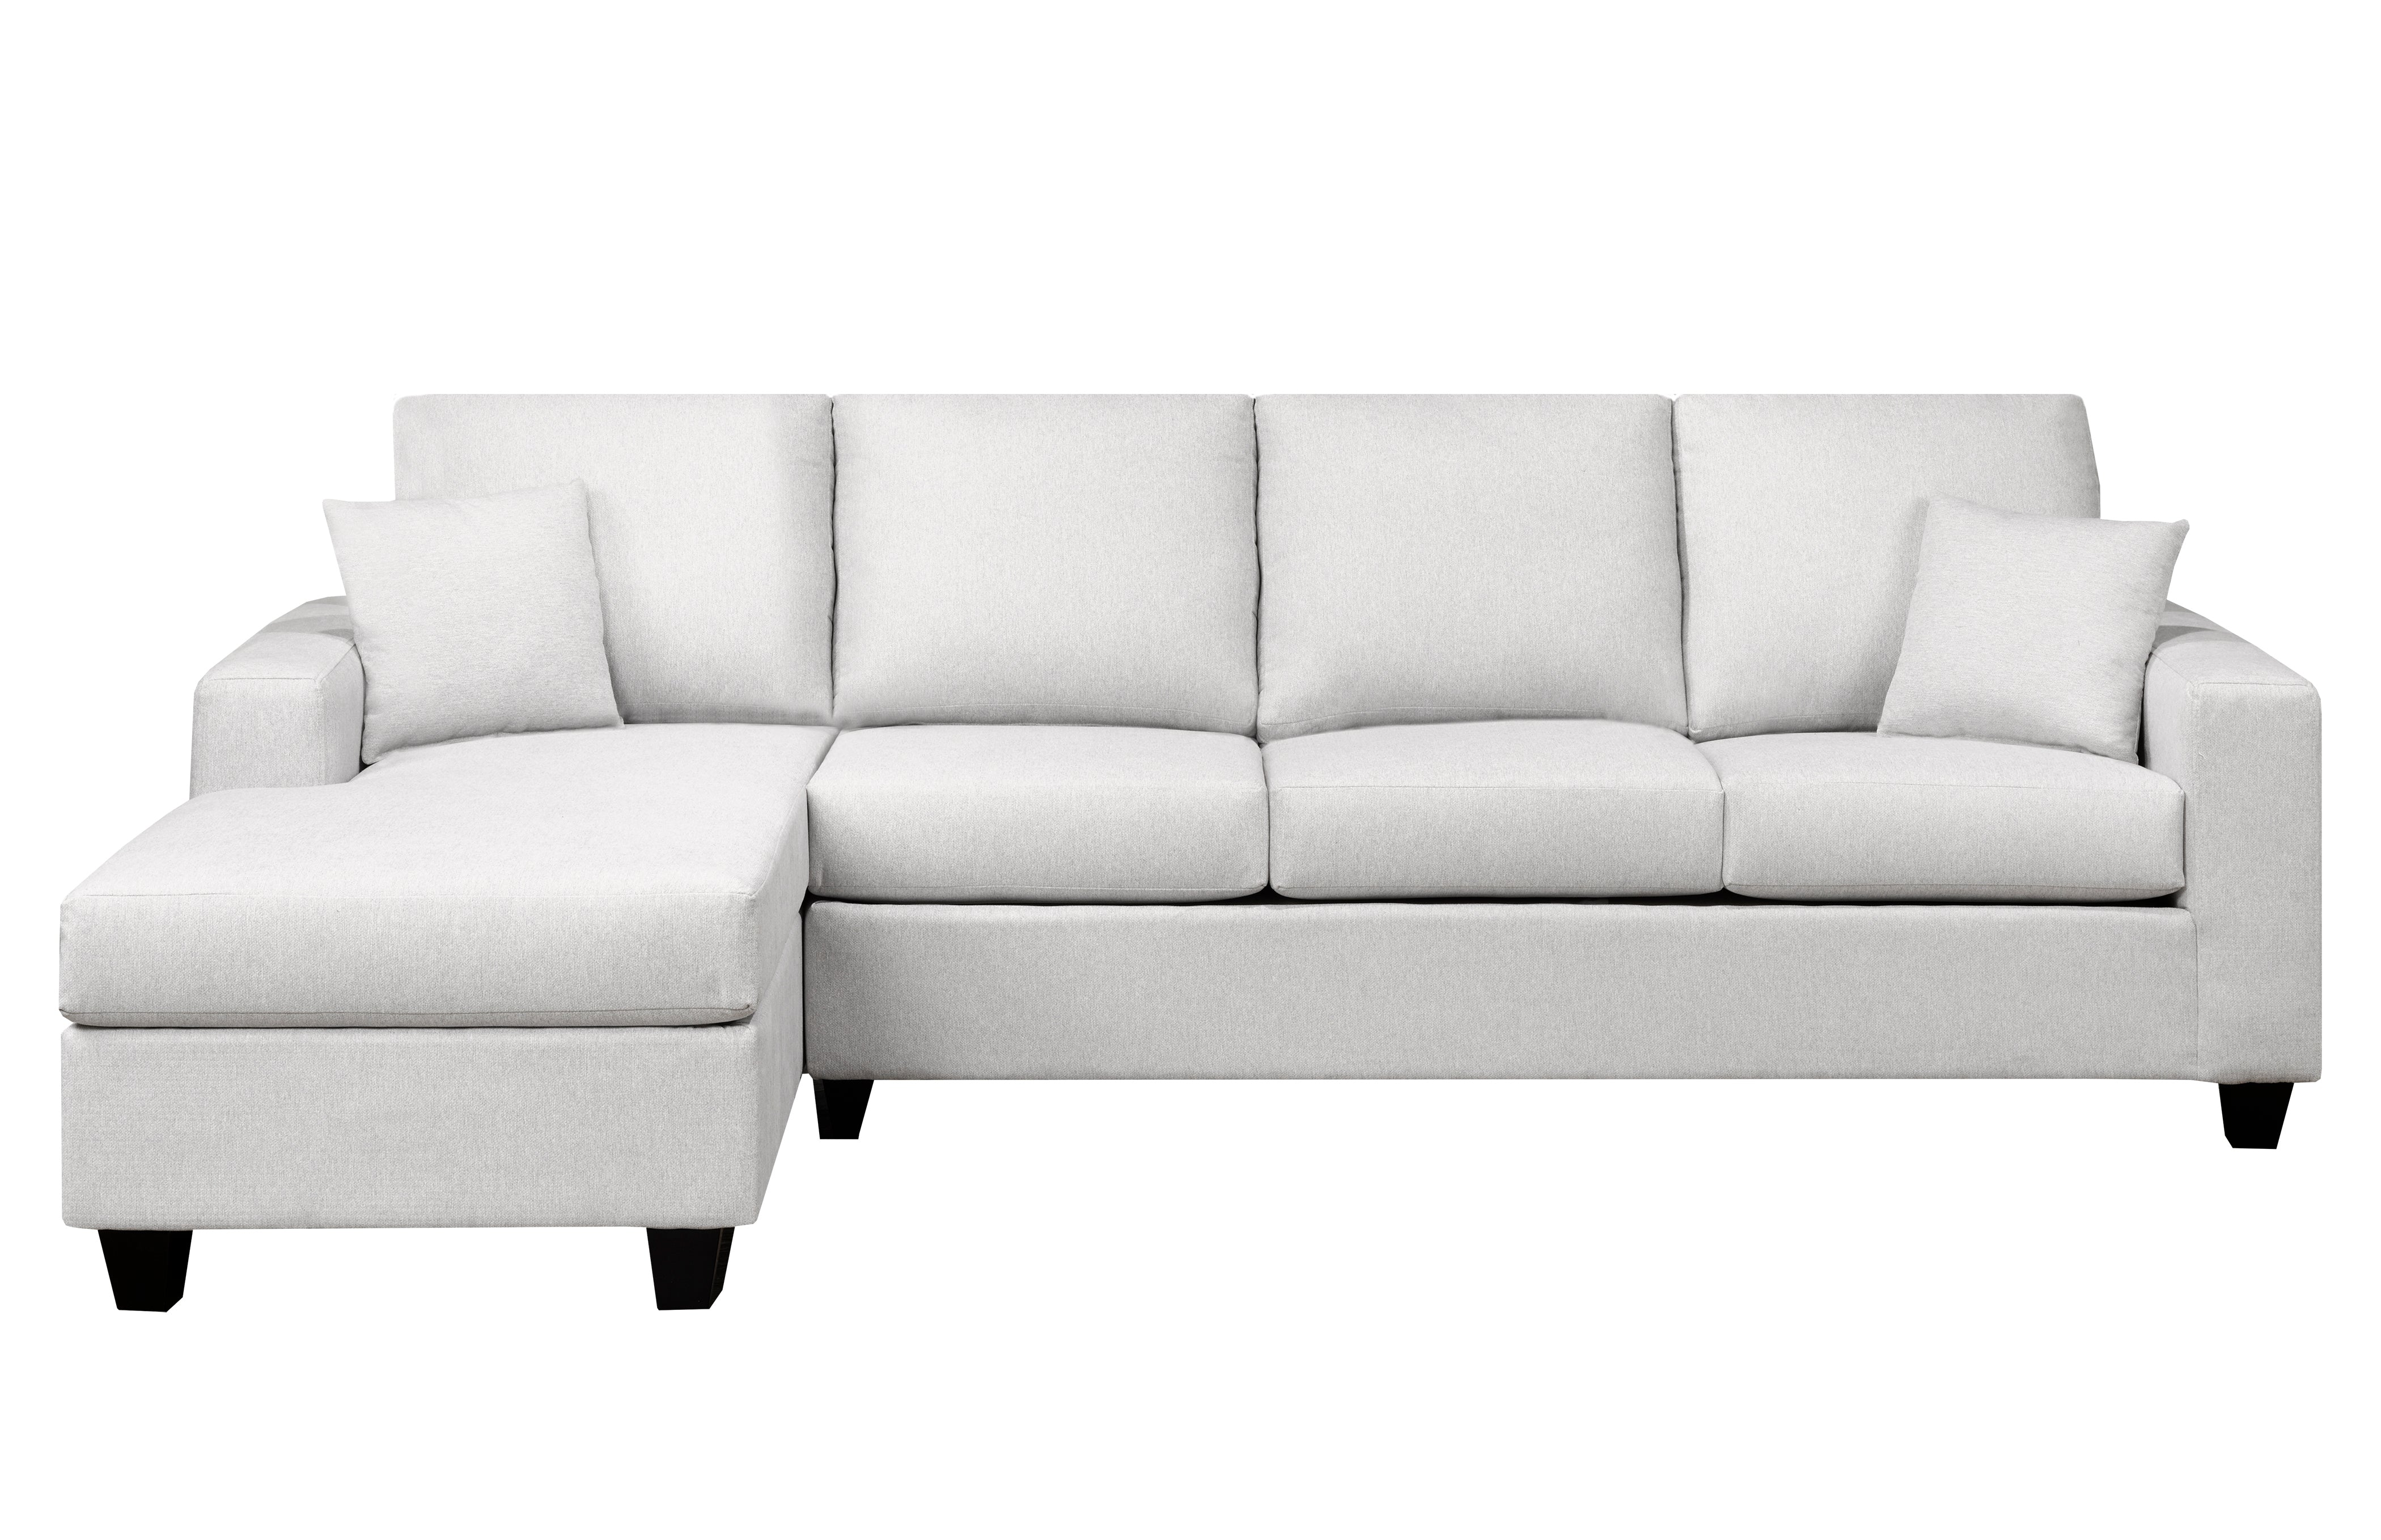 Bolton Sectional - Light Grey (4 Seater)